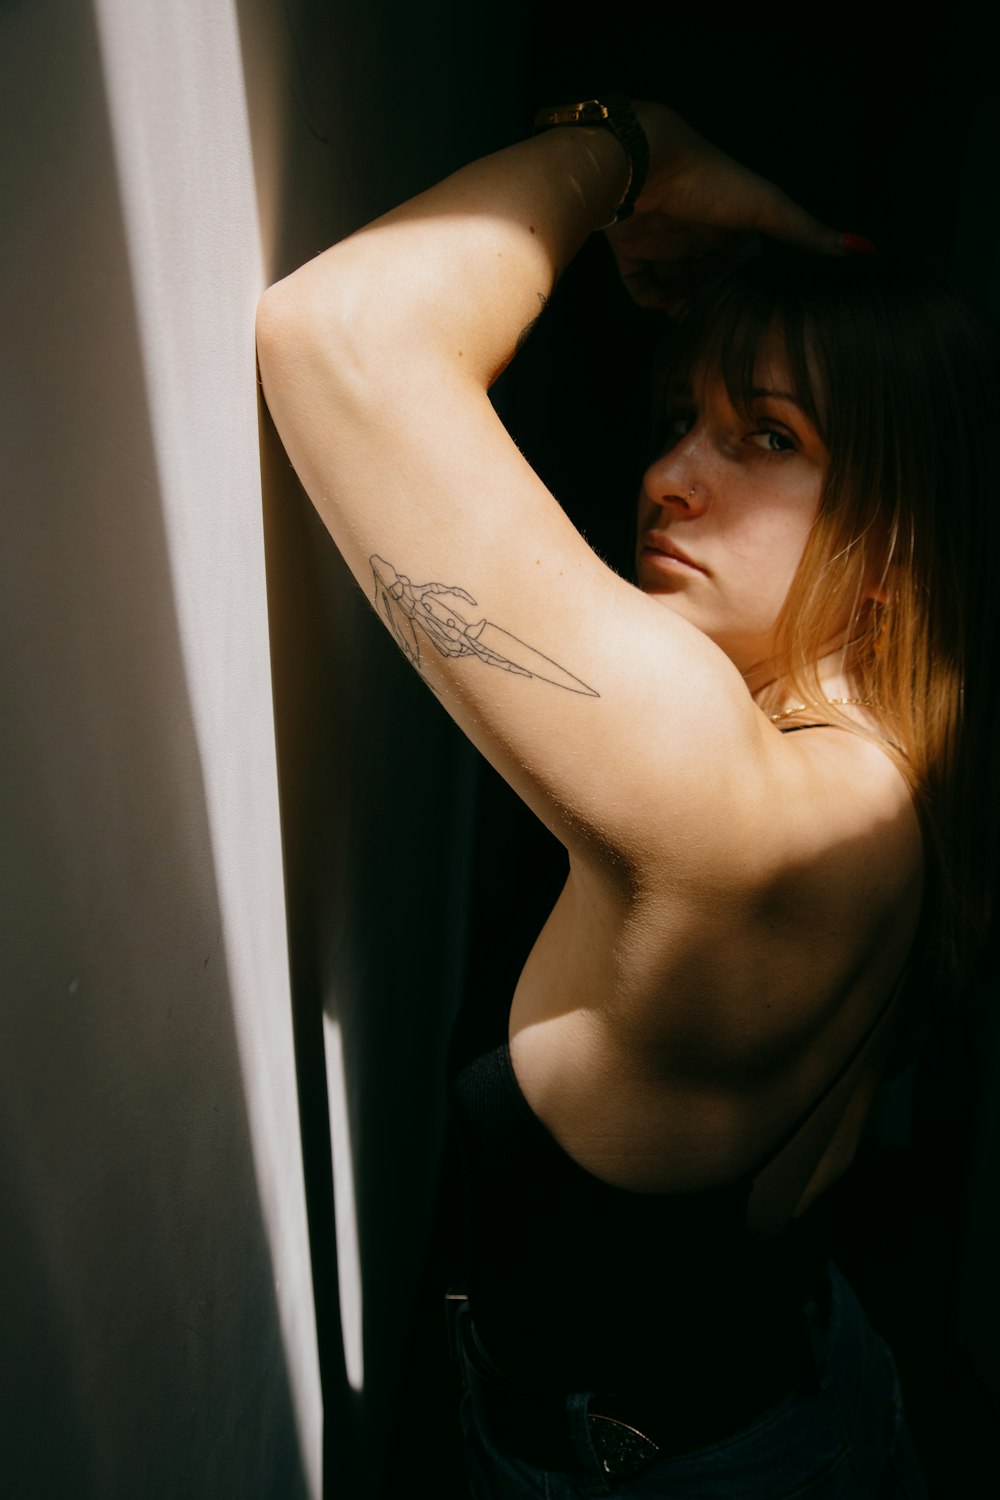 Woman in black tank top with tattoo on her back photo – Free Belgium Image  on Unsplash